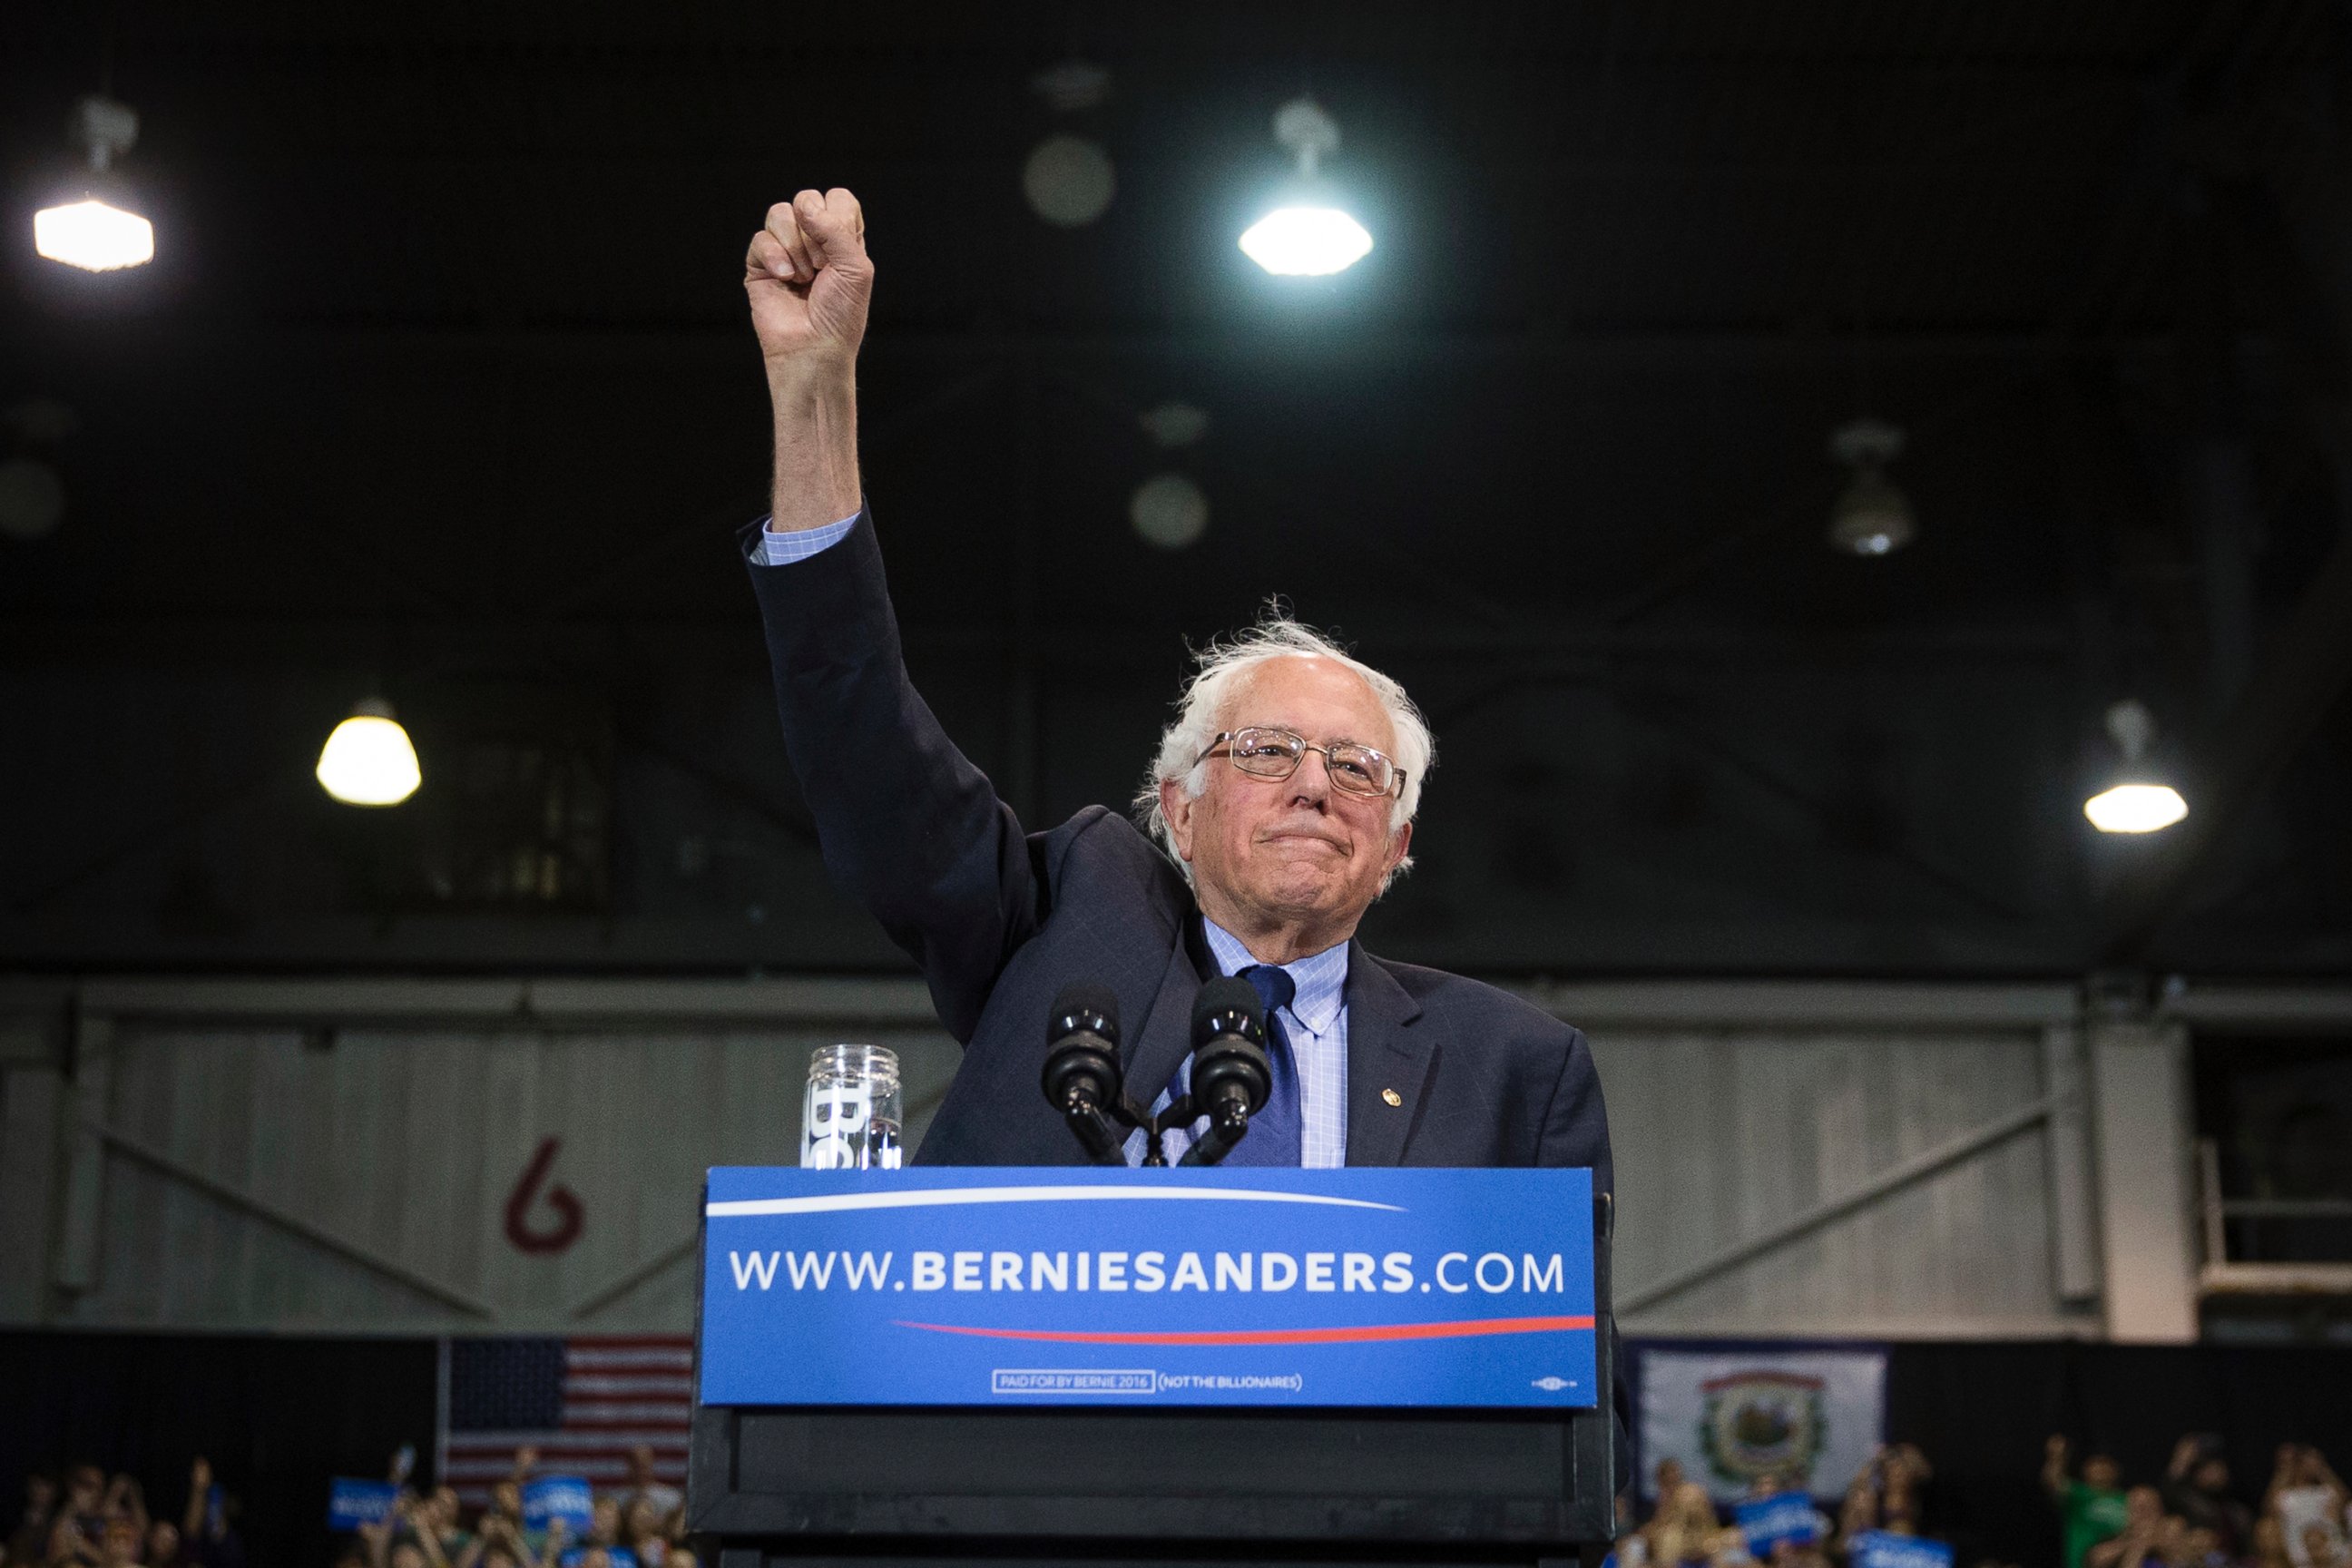 Democratic presidential candidate Sen. Bernie Sanders raises his fist to acknowledge the crowd before he speaks during an election night campaign event at the Big Sandy Superstore Arena, April 26, 2016, in Huntington, W.Va.